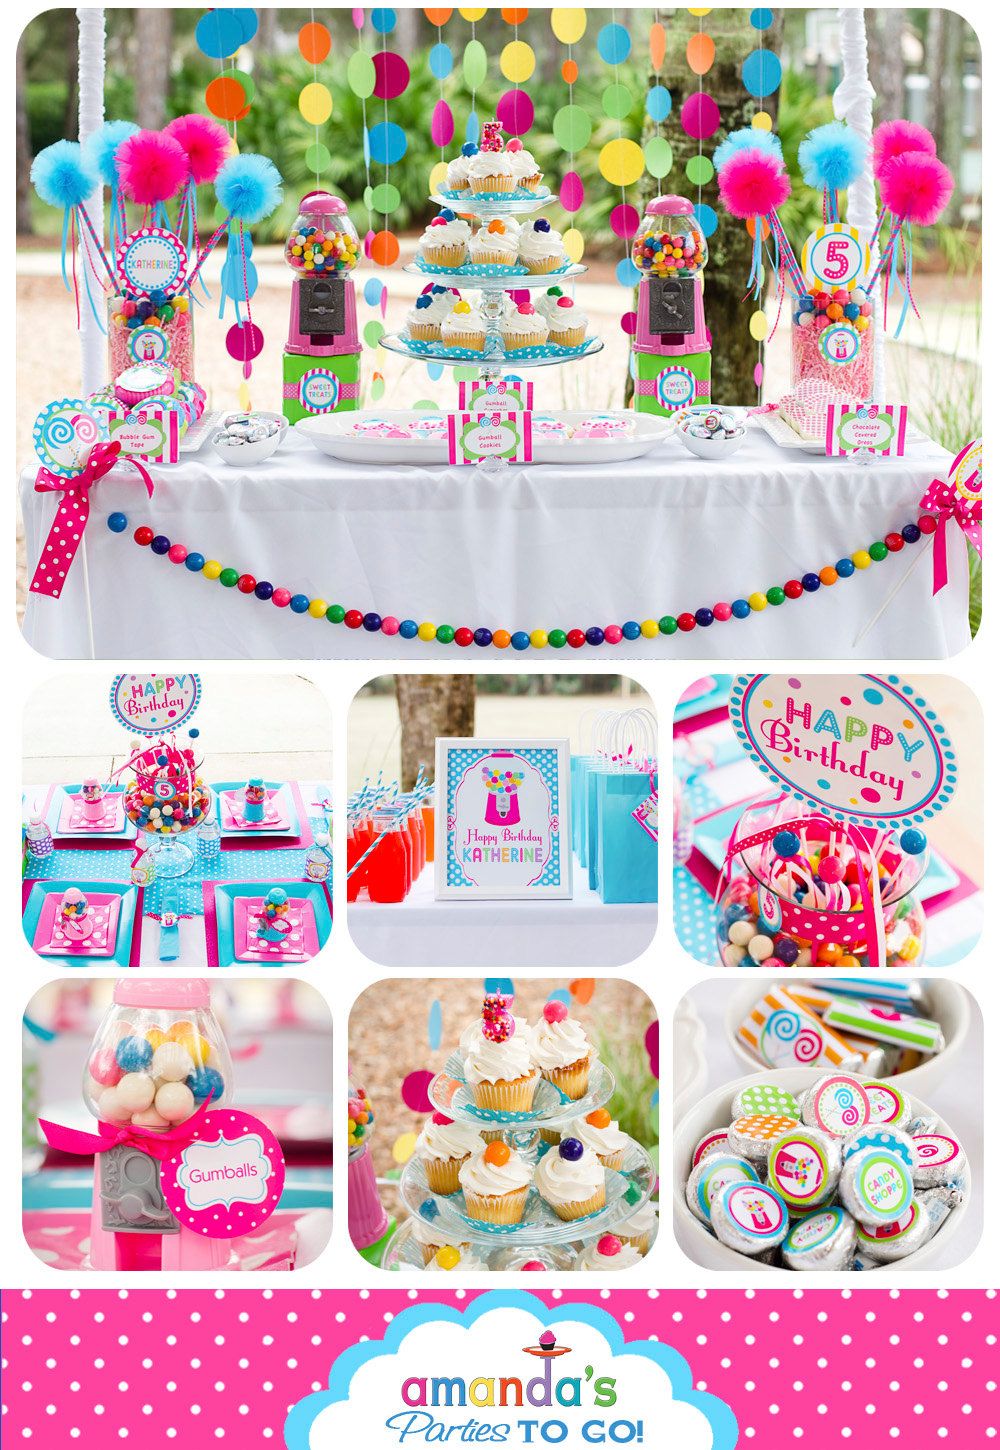 Candy Sweet Shoppe Party Printables Set – Candy Birthday – Gumball – Lollipop by